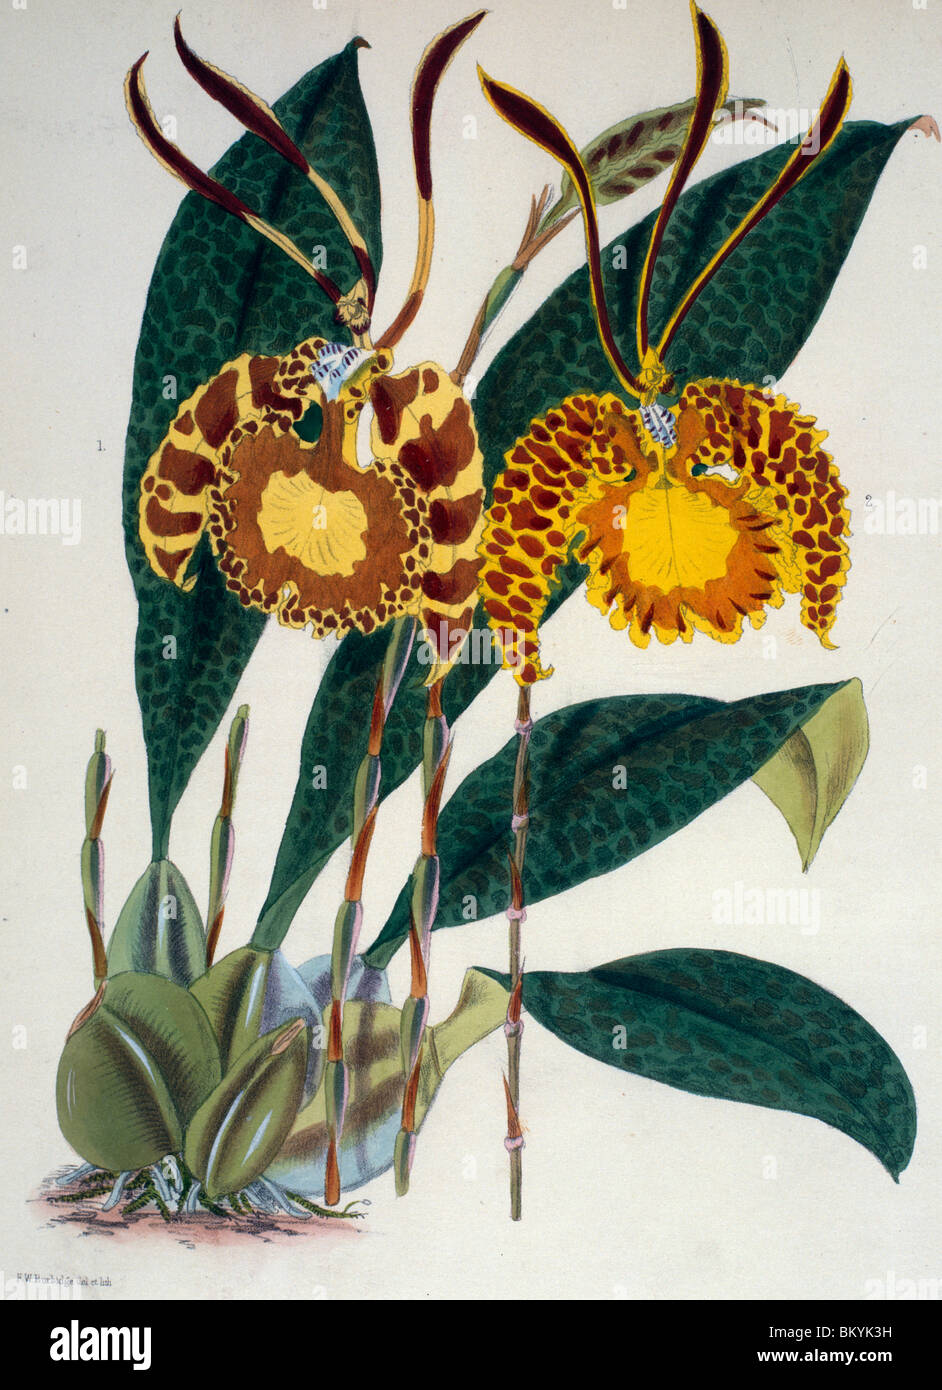 Oncidium Papilio Pictum by Samuel Jennings from Orchids: And How to Grow Them  (active 1789-1834 )  USA  Chicago  Newberry Stock Photo